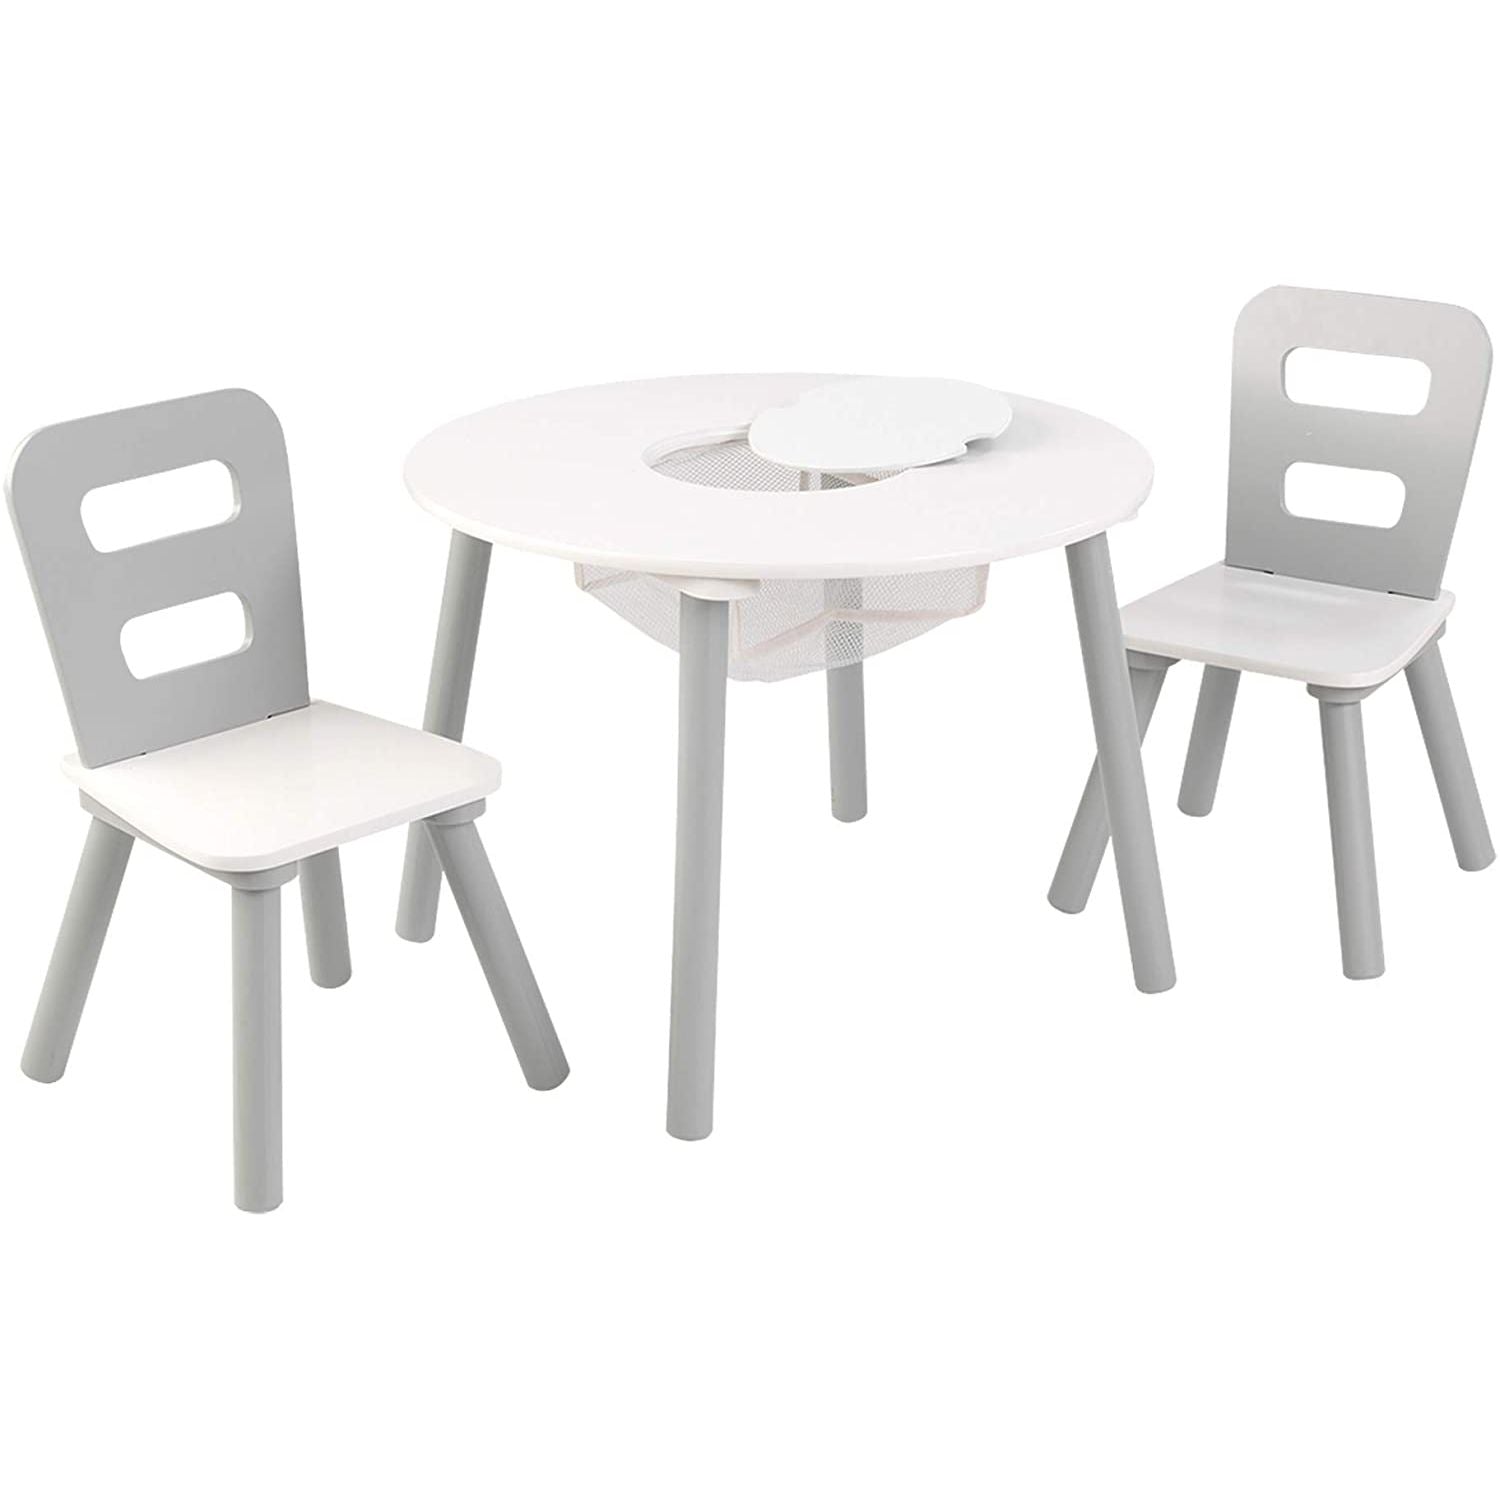 Round Table and 2 Chair Set for kids (Gray) - Little Kids Business